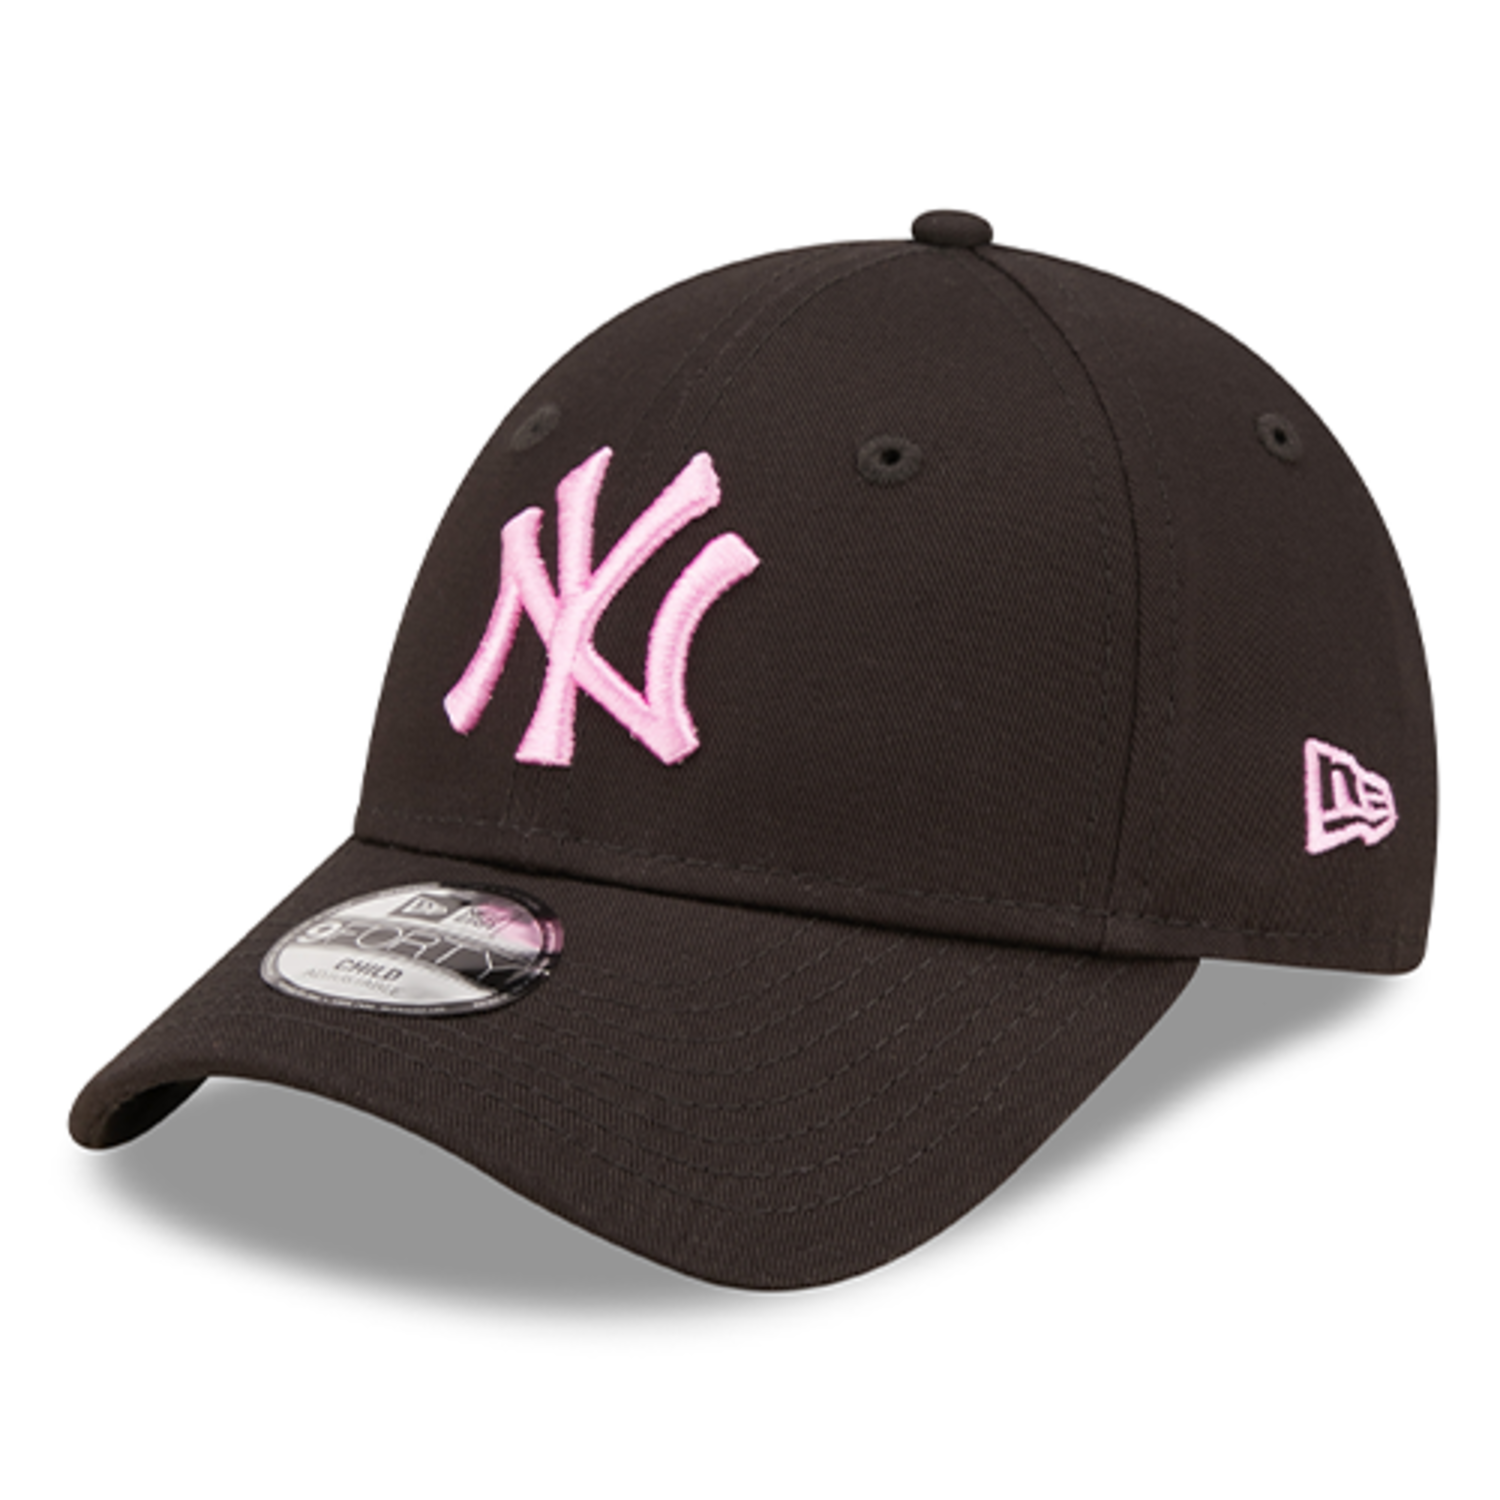 Yankees 9Forty Cap Black Pink - Sports